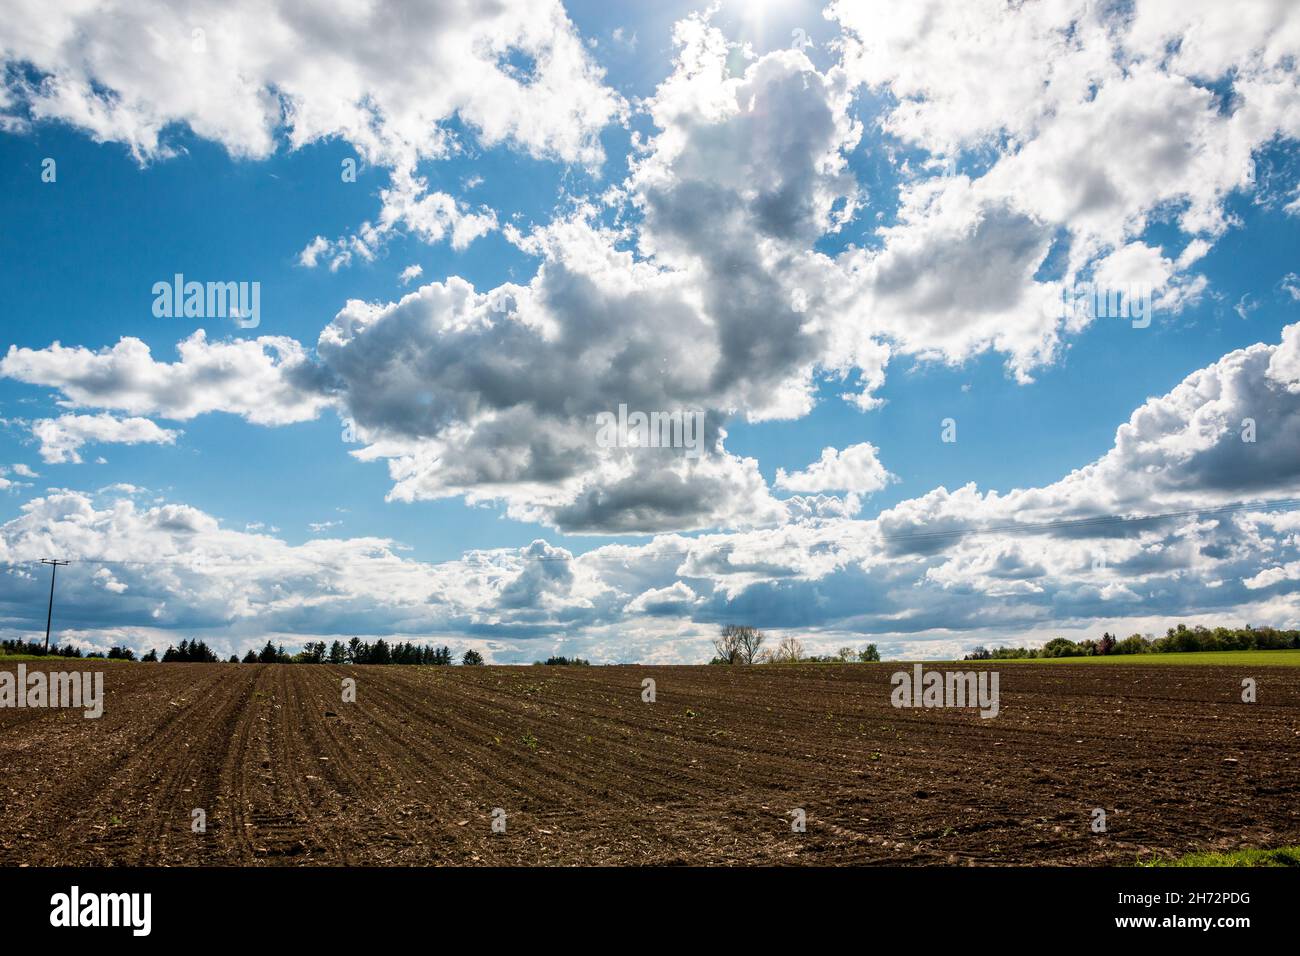 Big brown fields of fertile soil and the blue sky with white clouds Stock Photo